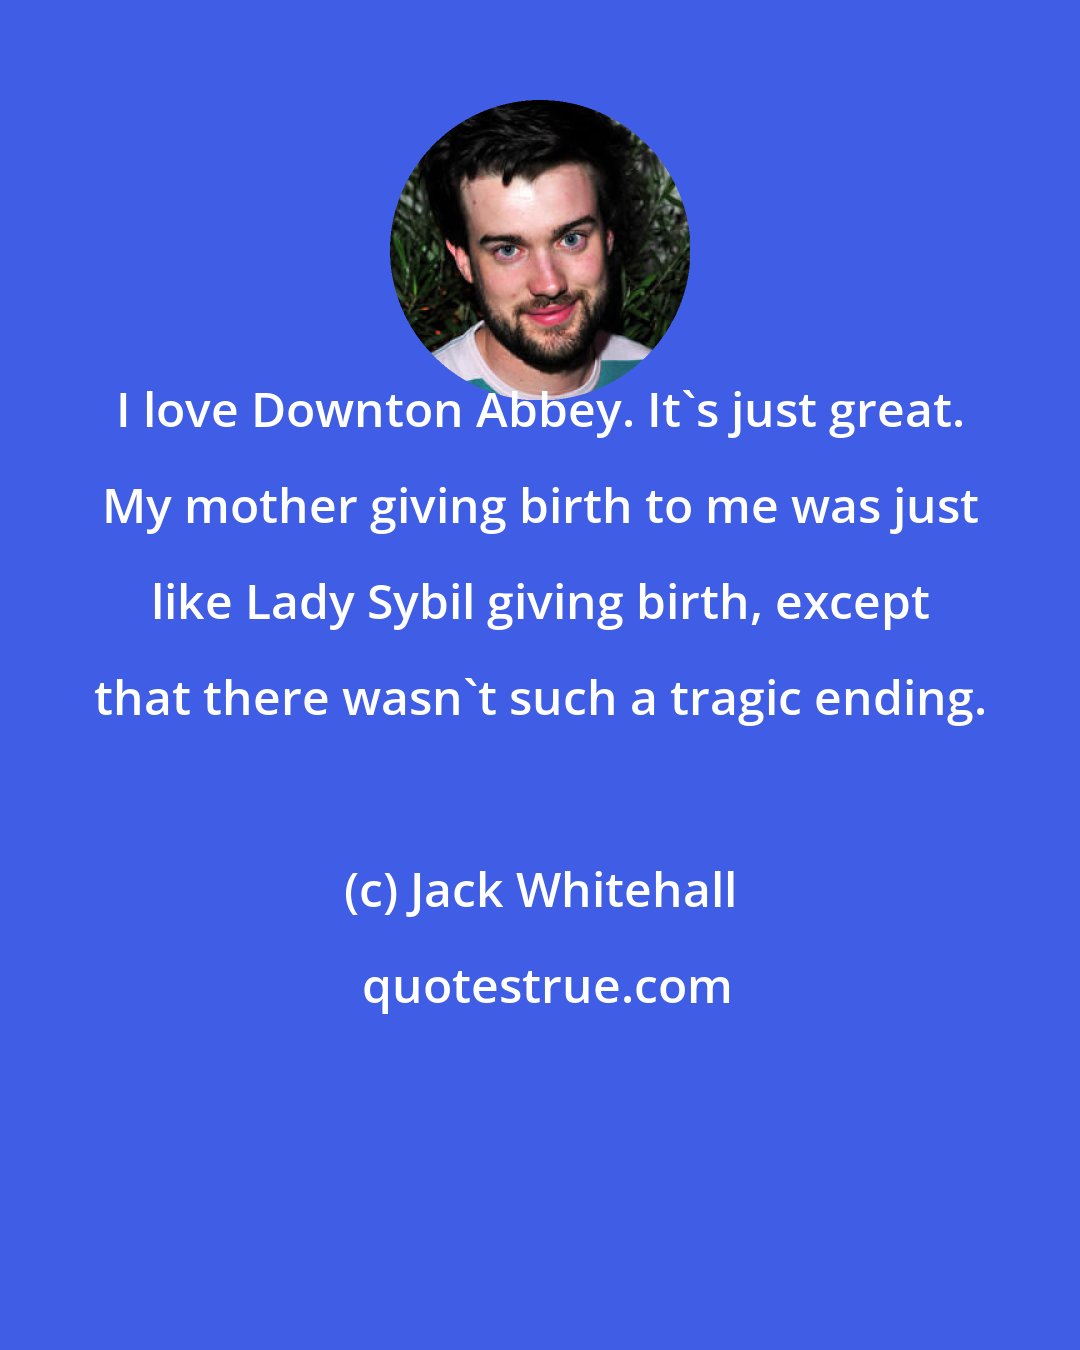 Jack Whitehall: I love Downton Abbey. It's just great. My mother giving birth to me was just like Lady Sybil giving birth, except that there wasn't such a tragic ending.